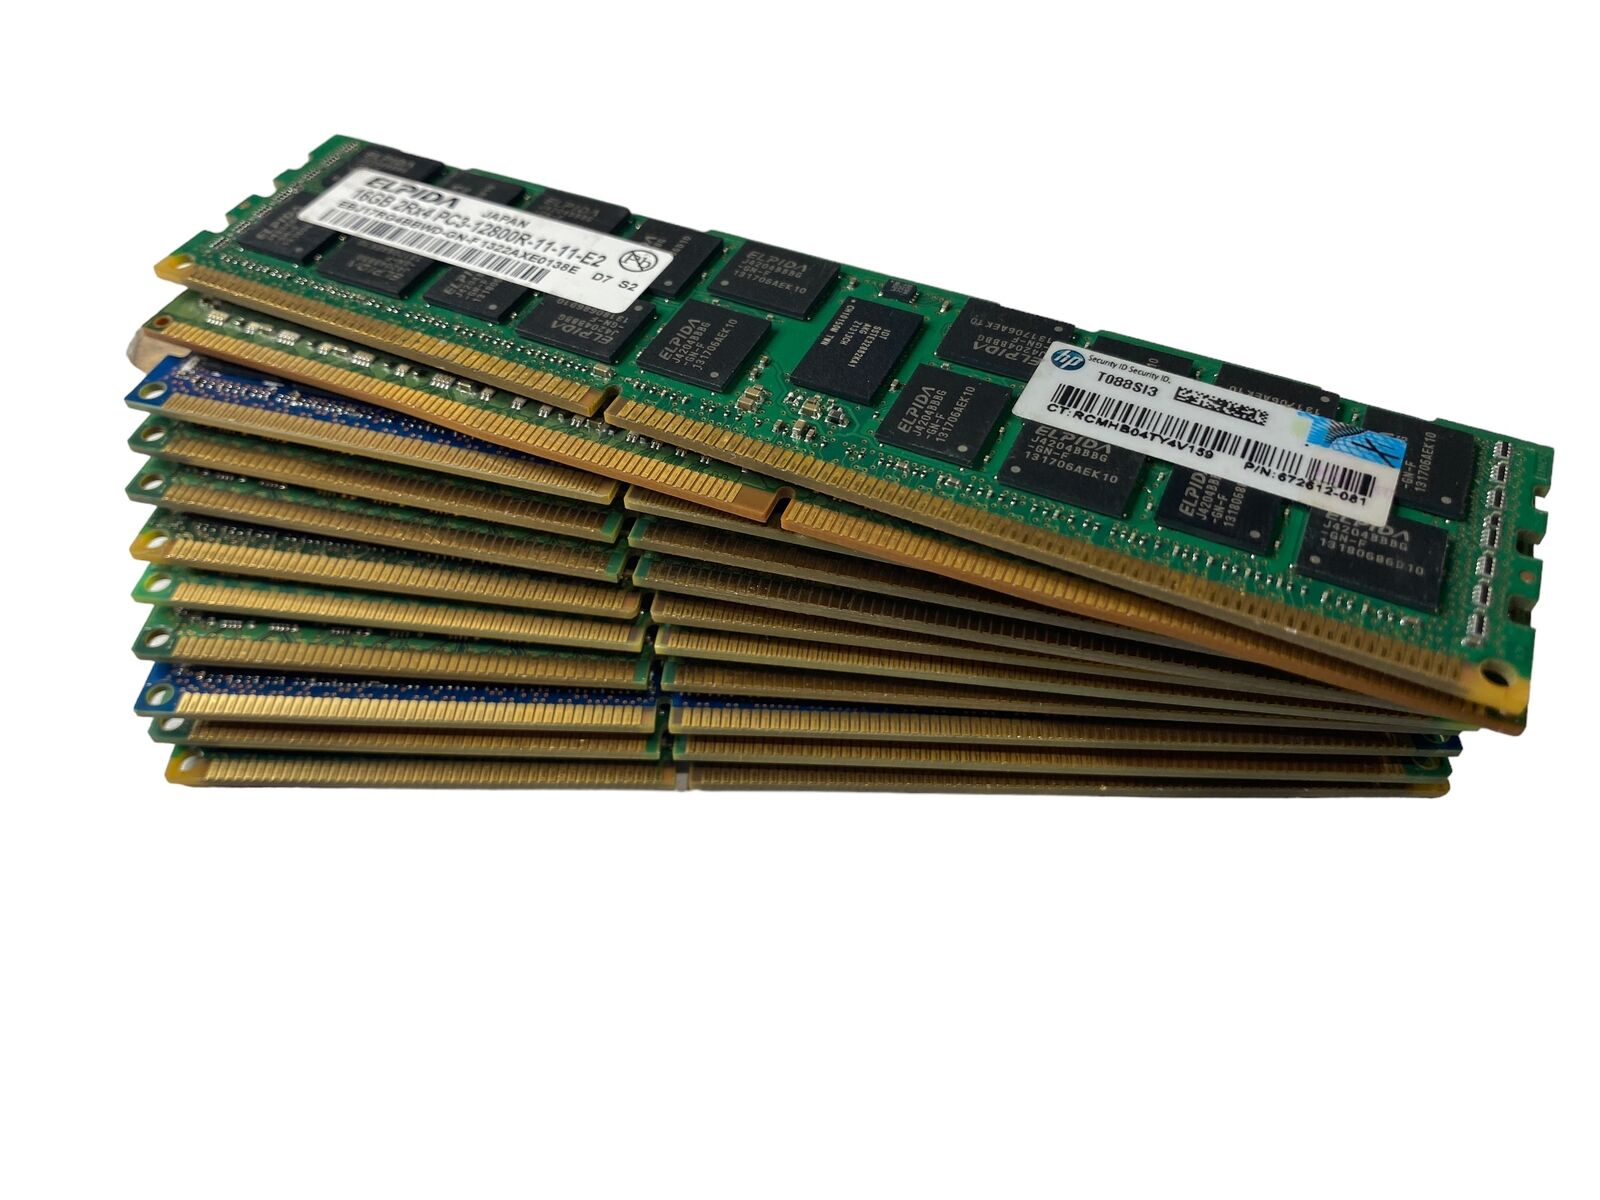 Mixed Brands Sever RAM 16Gb | 2Rx4 PC3-12800R | Lot of 11